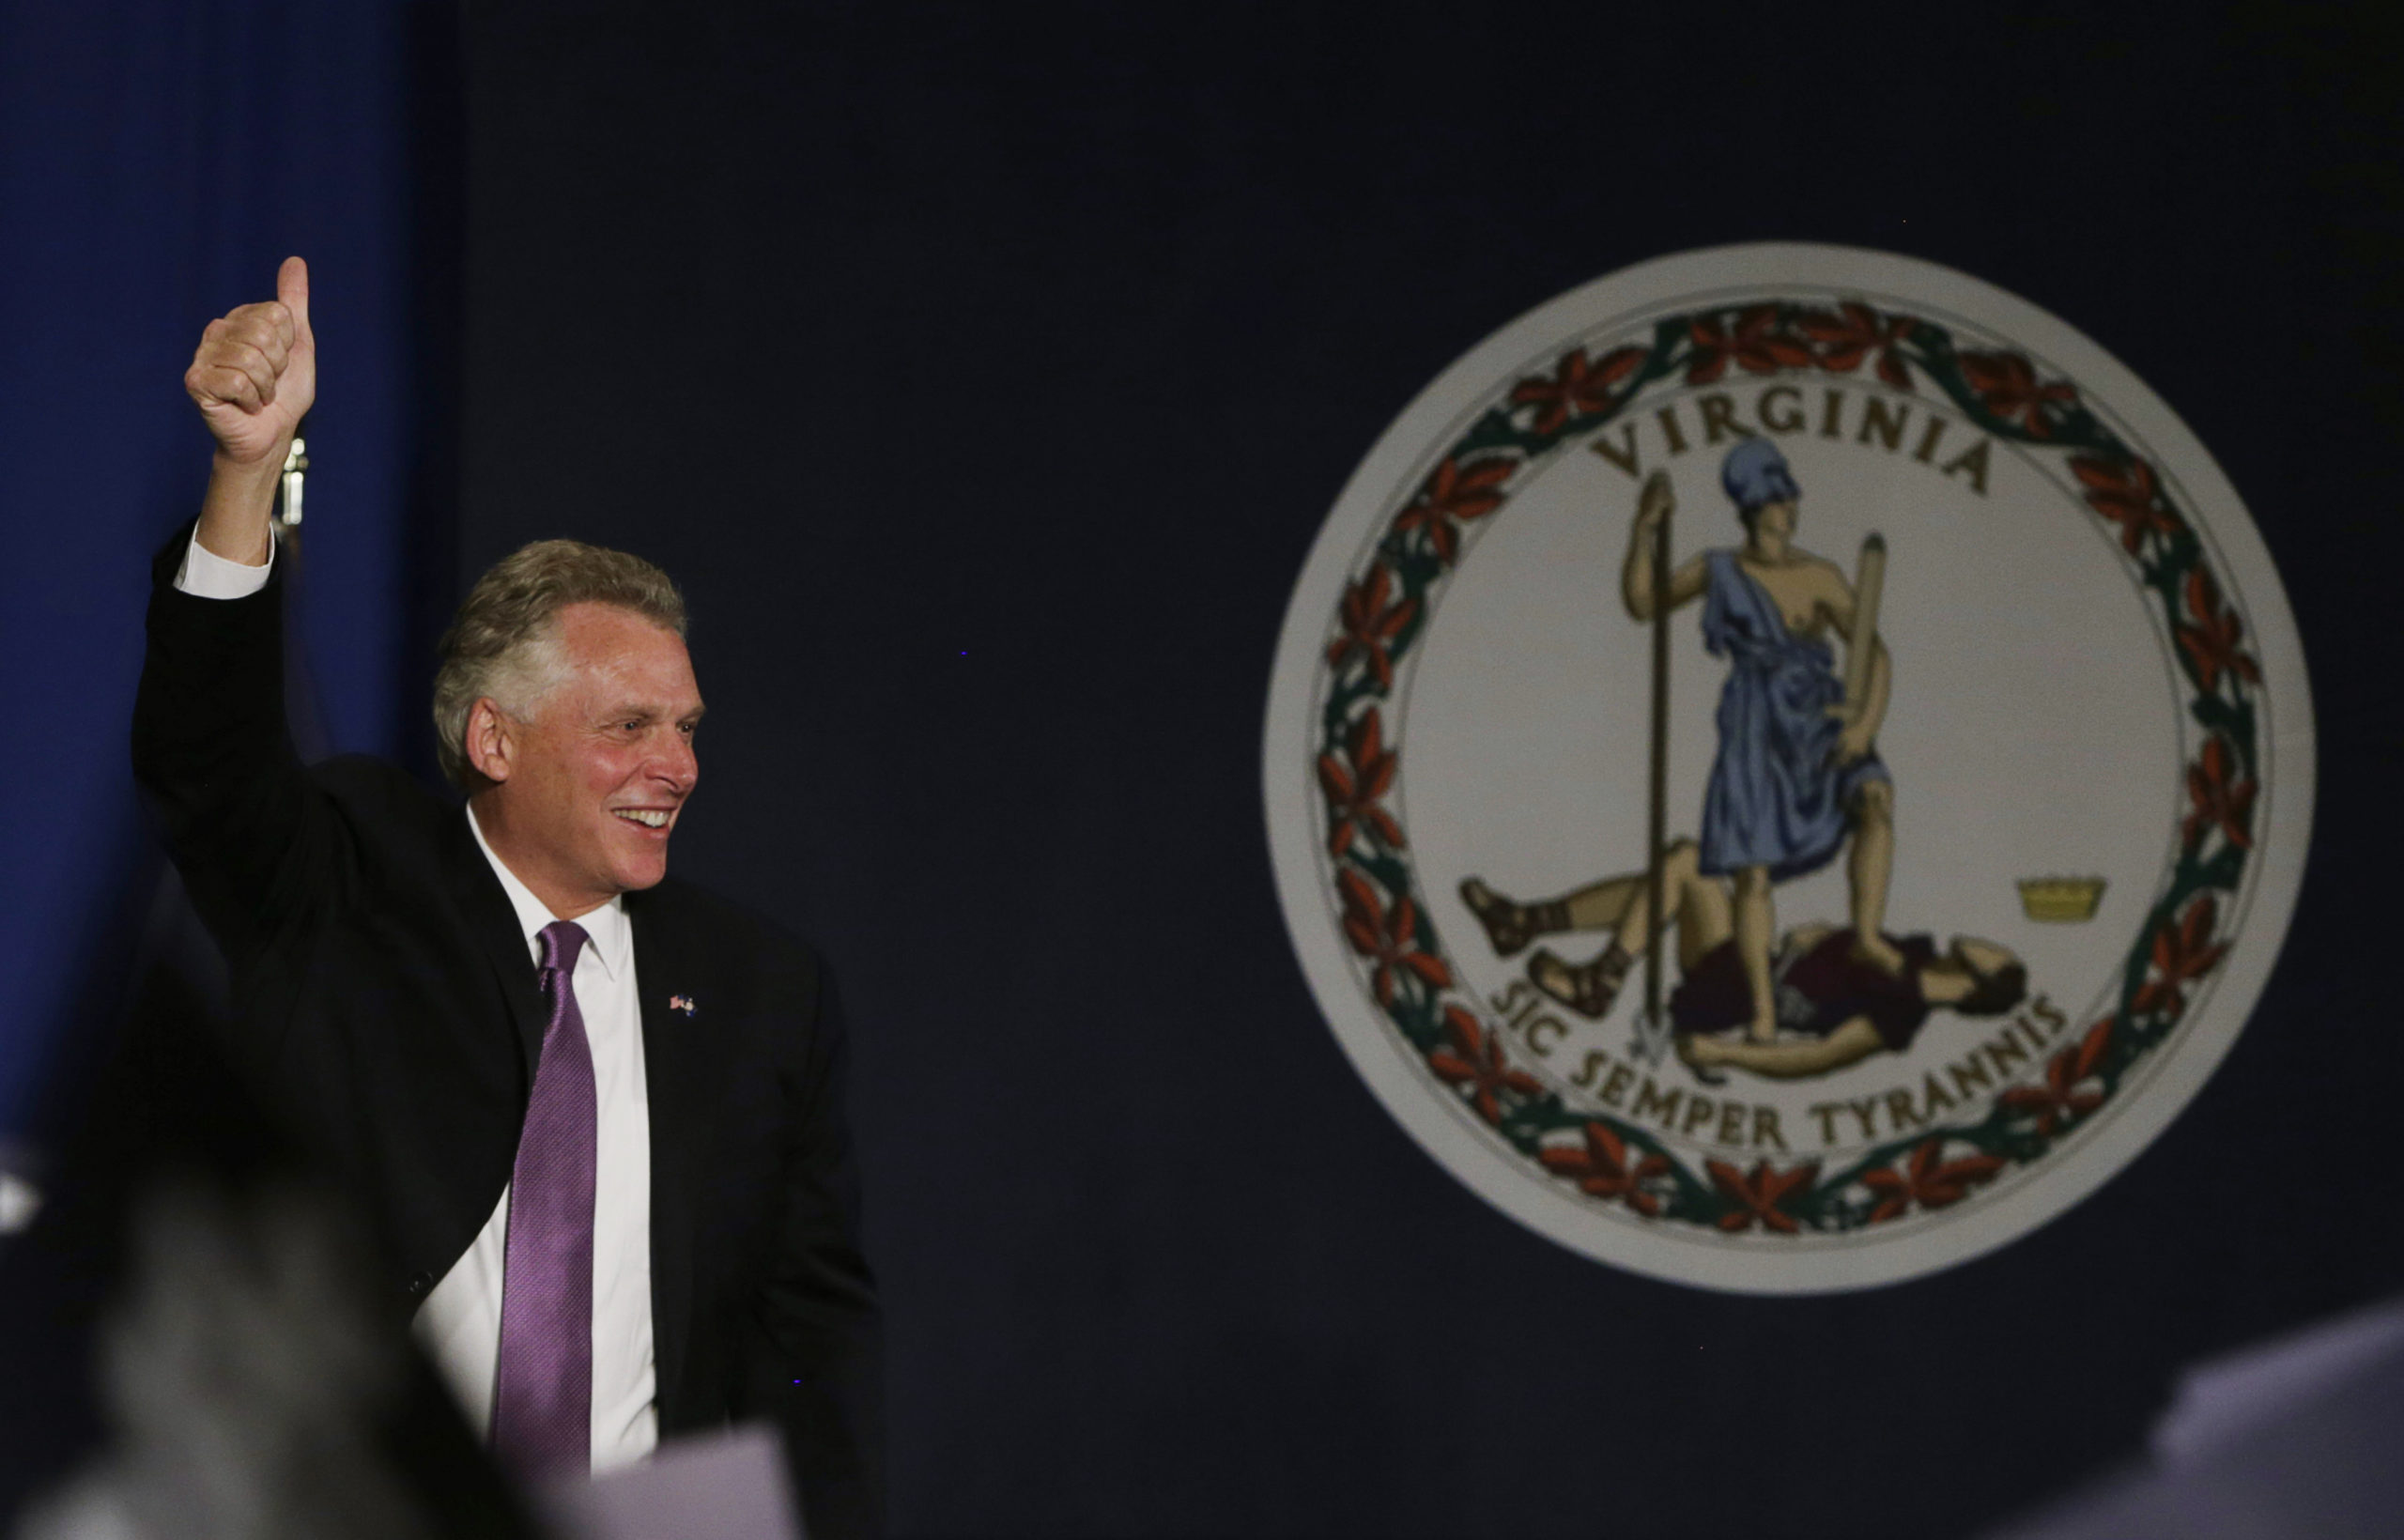 Virginia Democratic governor-elect Terry McAuliffe speaks at his election night victory rally in Tyson's Corner, Virginia November 5, 2013. McAuliffe defeated Republican candidate Ken Cuccinelli in today's governor's election in Virginia. REUTERS/Gary Cameron    (UNITED STATES - Tags: POLITICS ELECTIONS) - RTX151T0